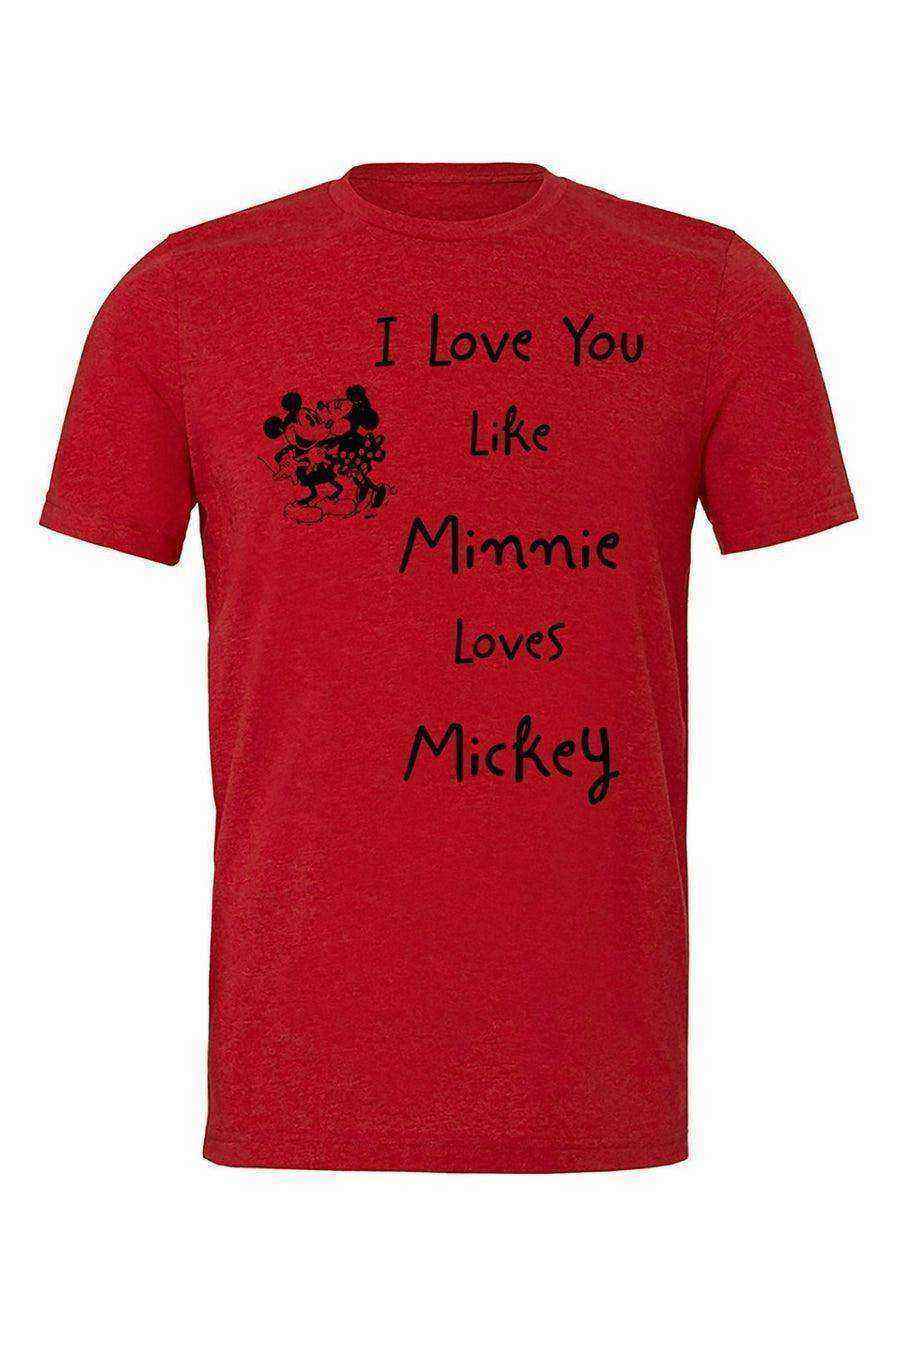 Womens | Couples Minnie and Mickey Tee - Dylan's Tees